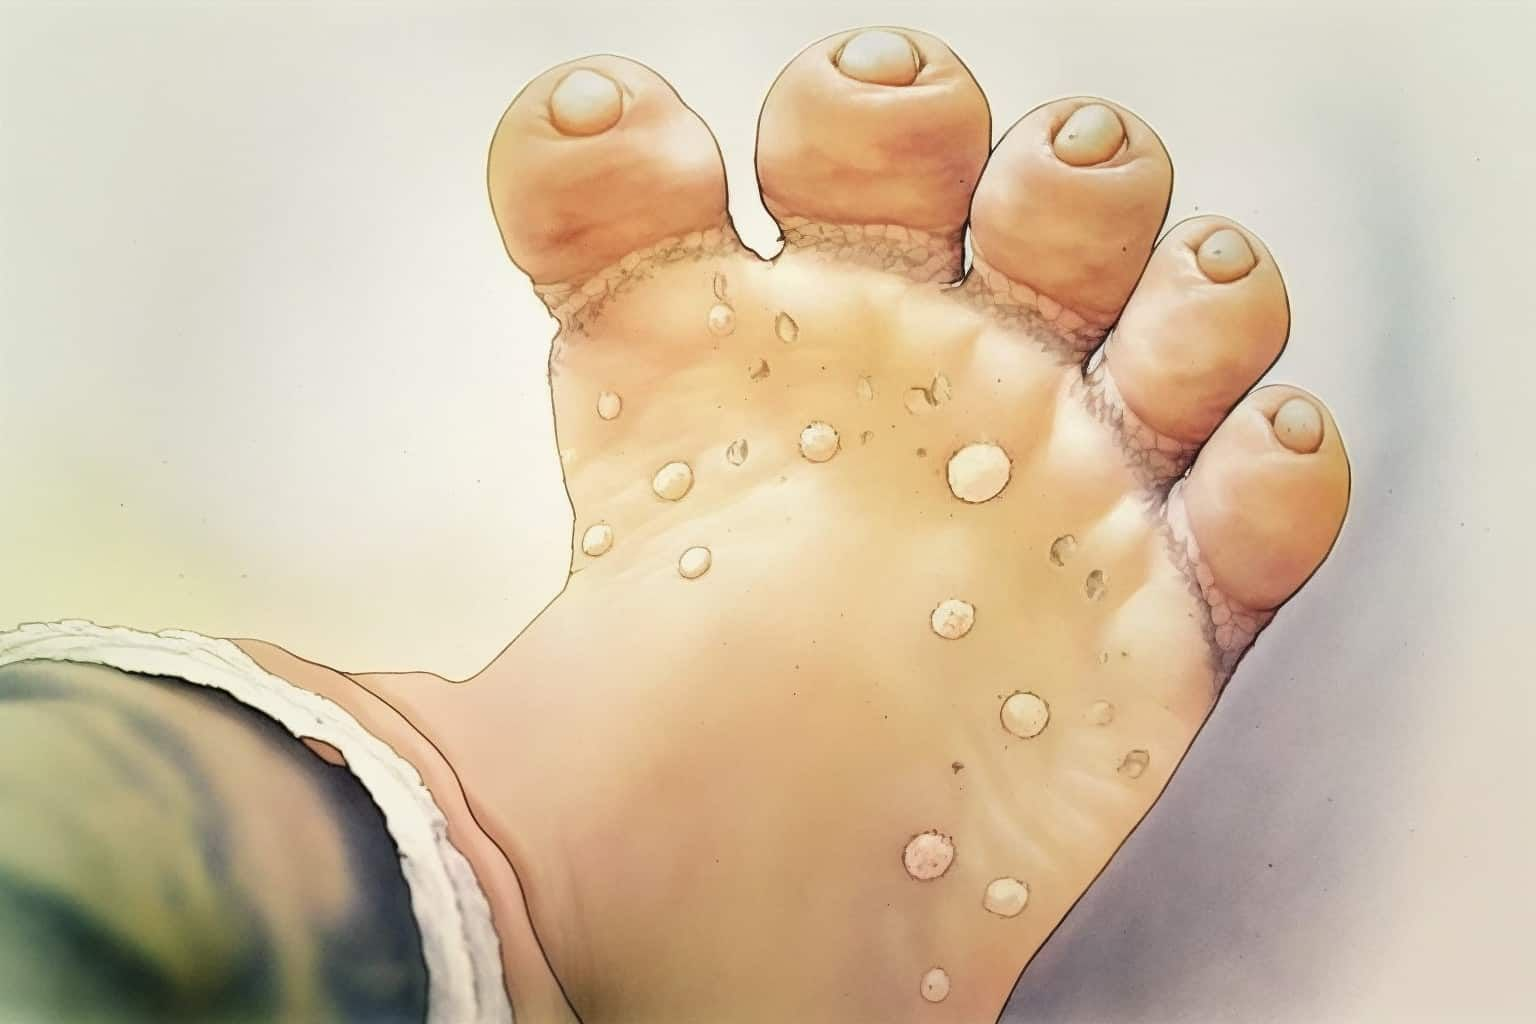 A foot full of warts